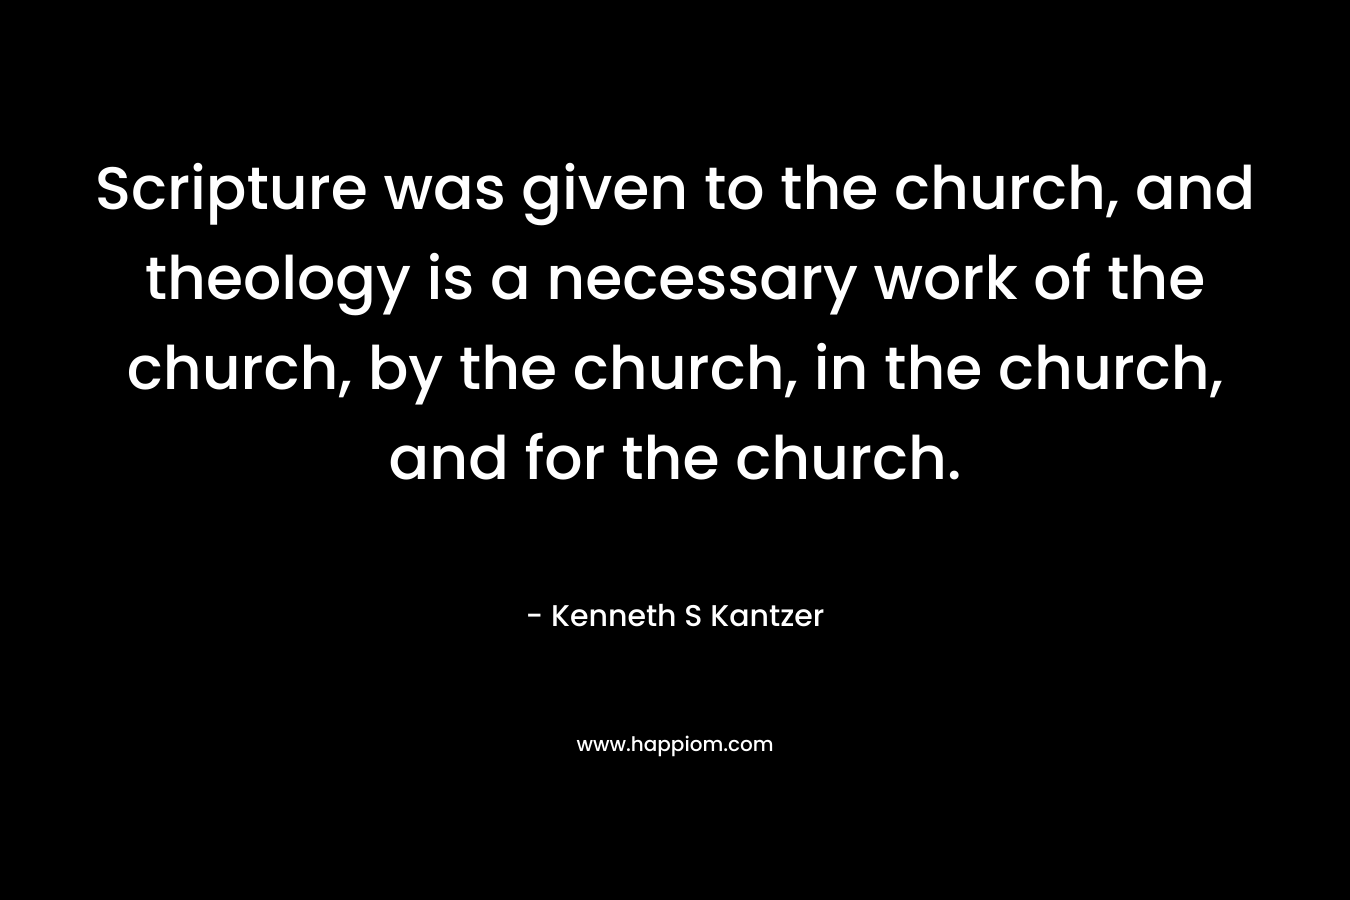 Scripture was given to the church, and theology is a necessary work of the church, by the church, in the church, and for the church.